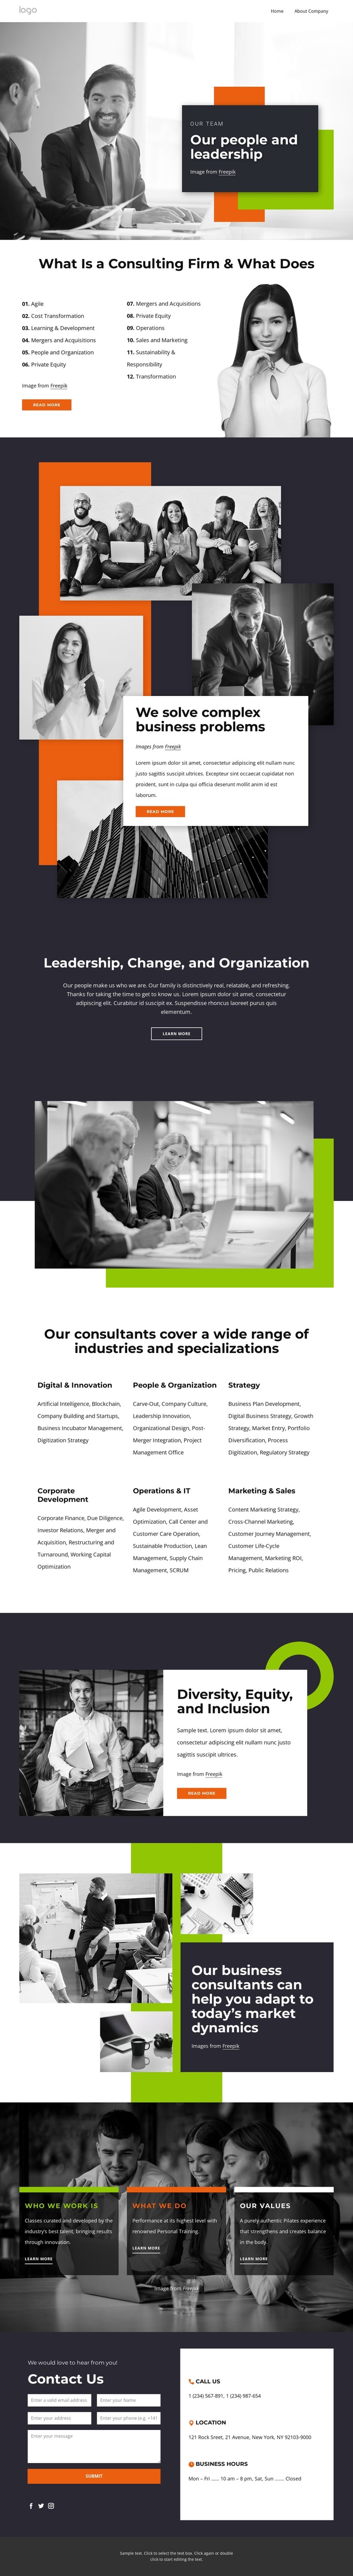 Our people, partners and leadership HTML Template